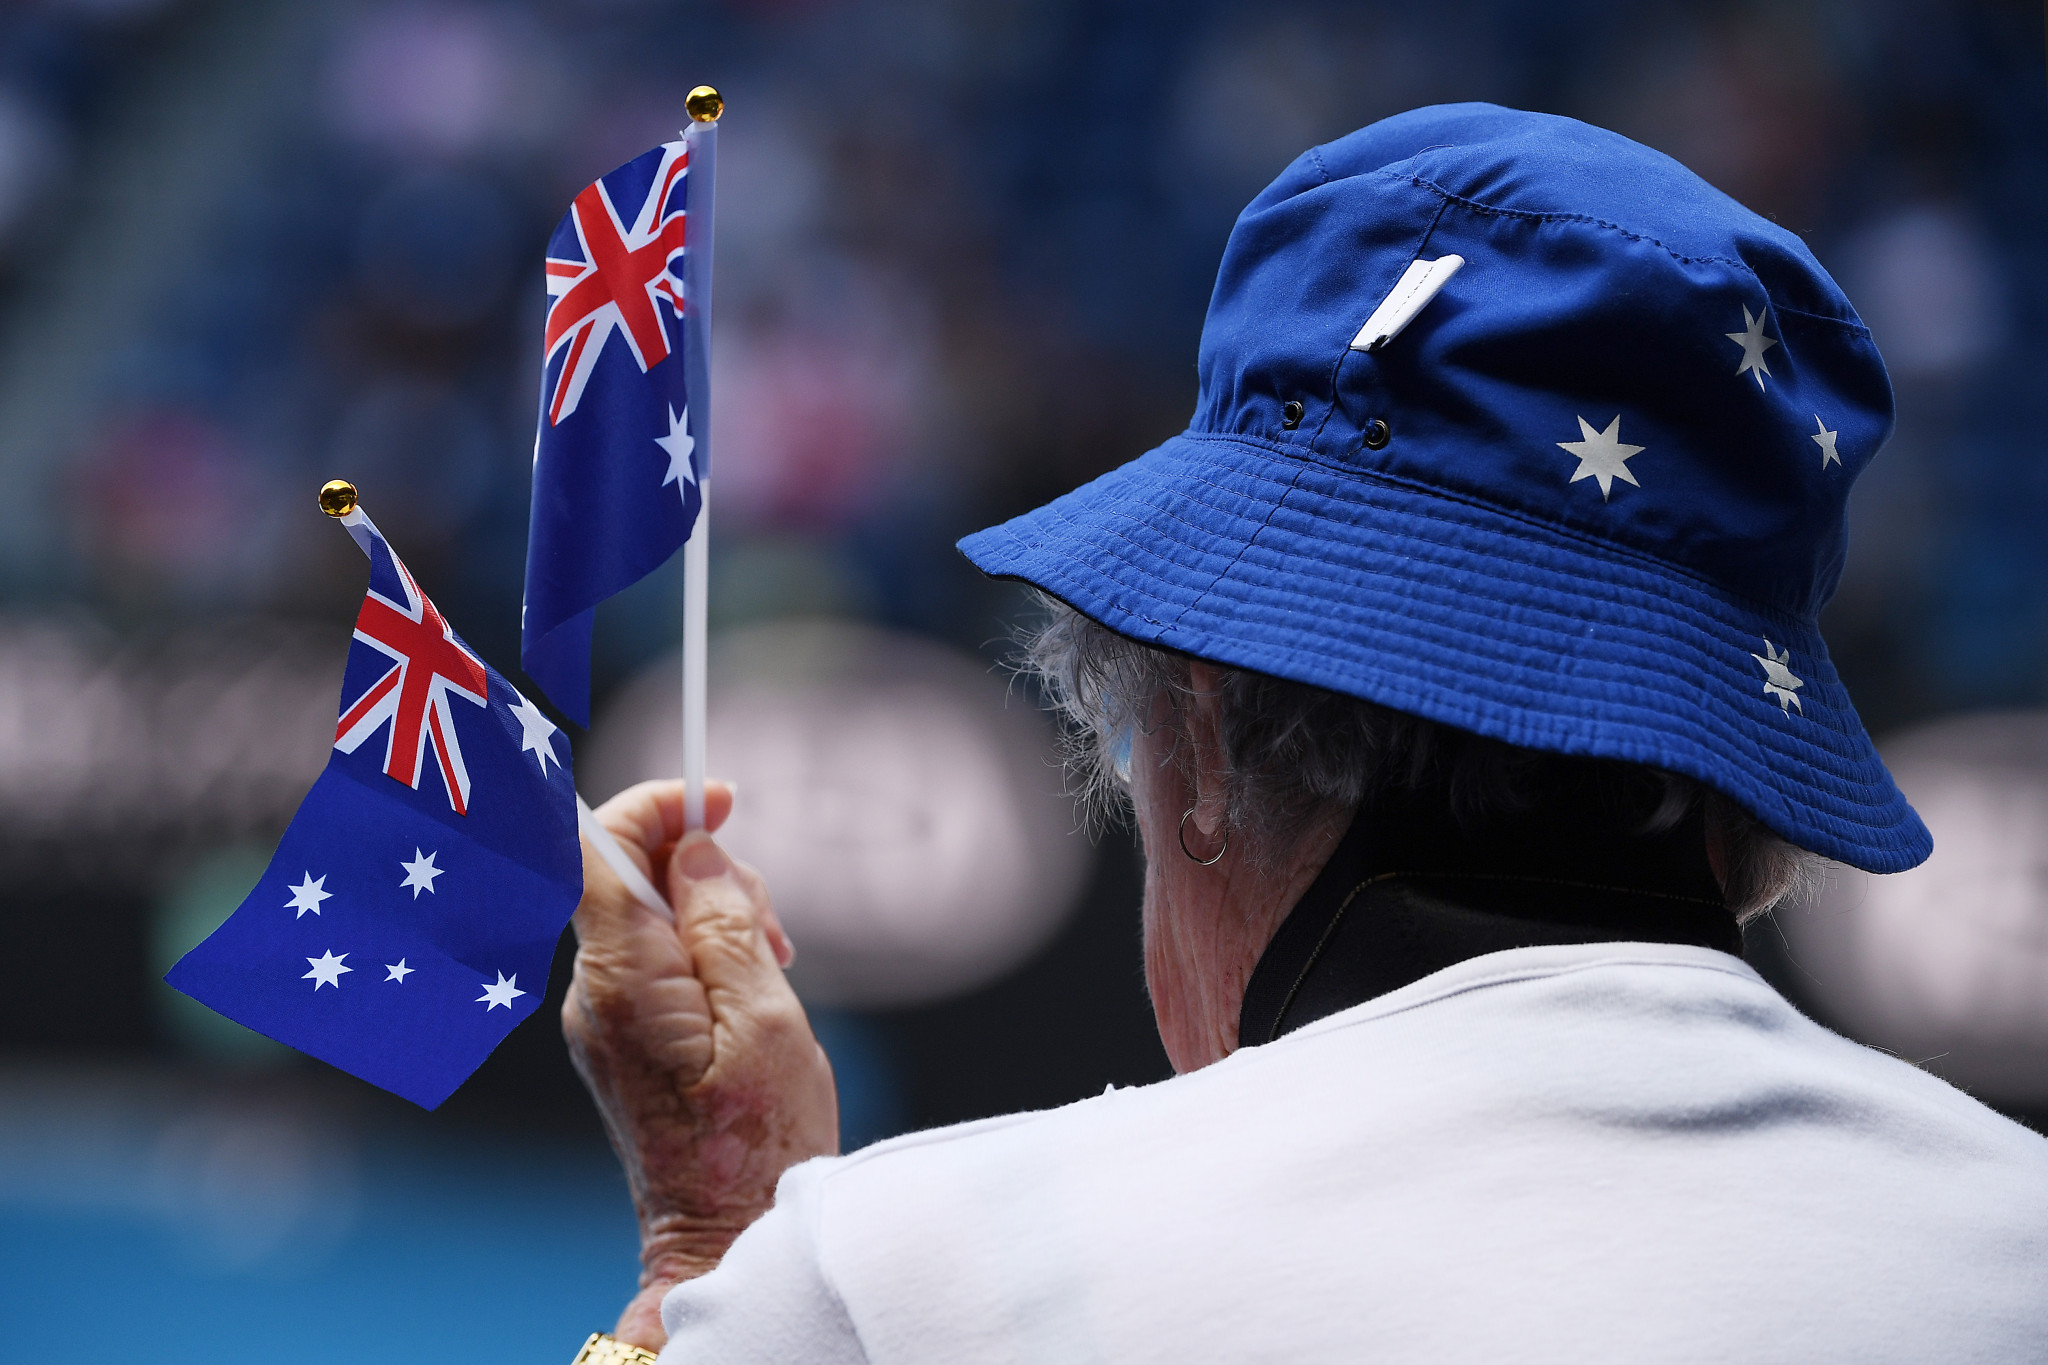 A fan shows her support for Barty, who is hoping to become the first Australian champion in Melbourne for 42 years ©Getty Images